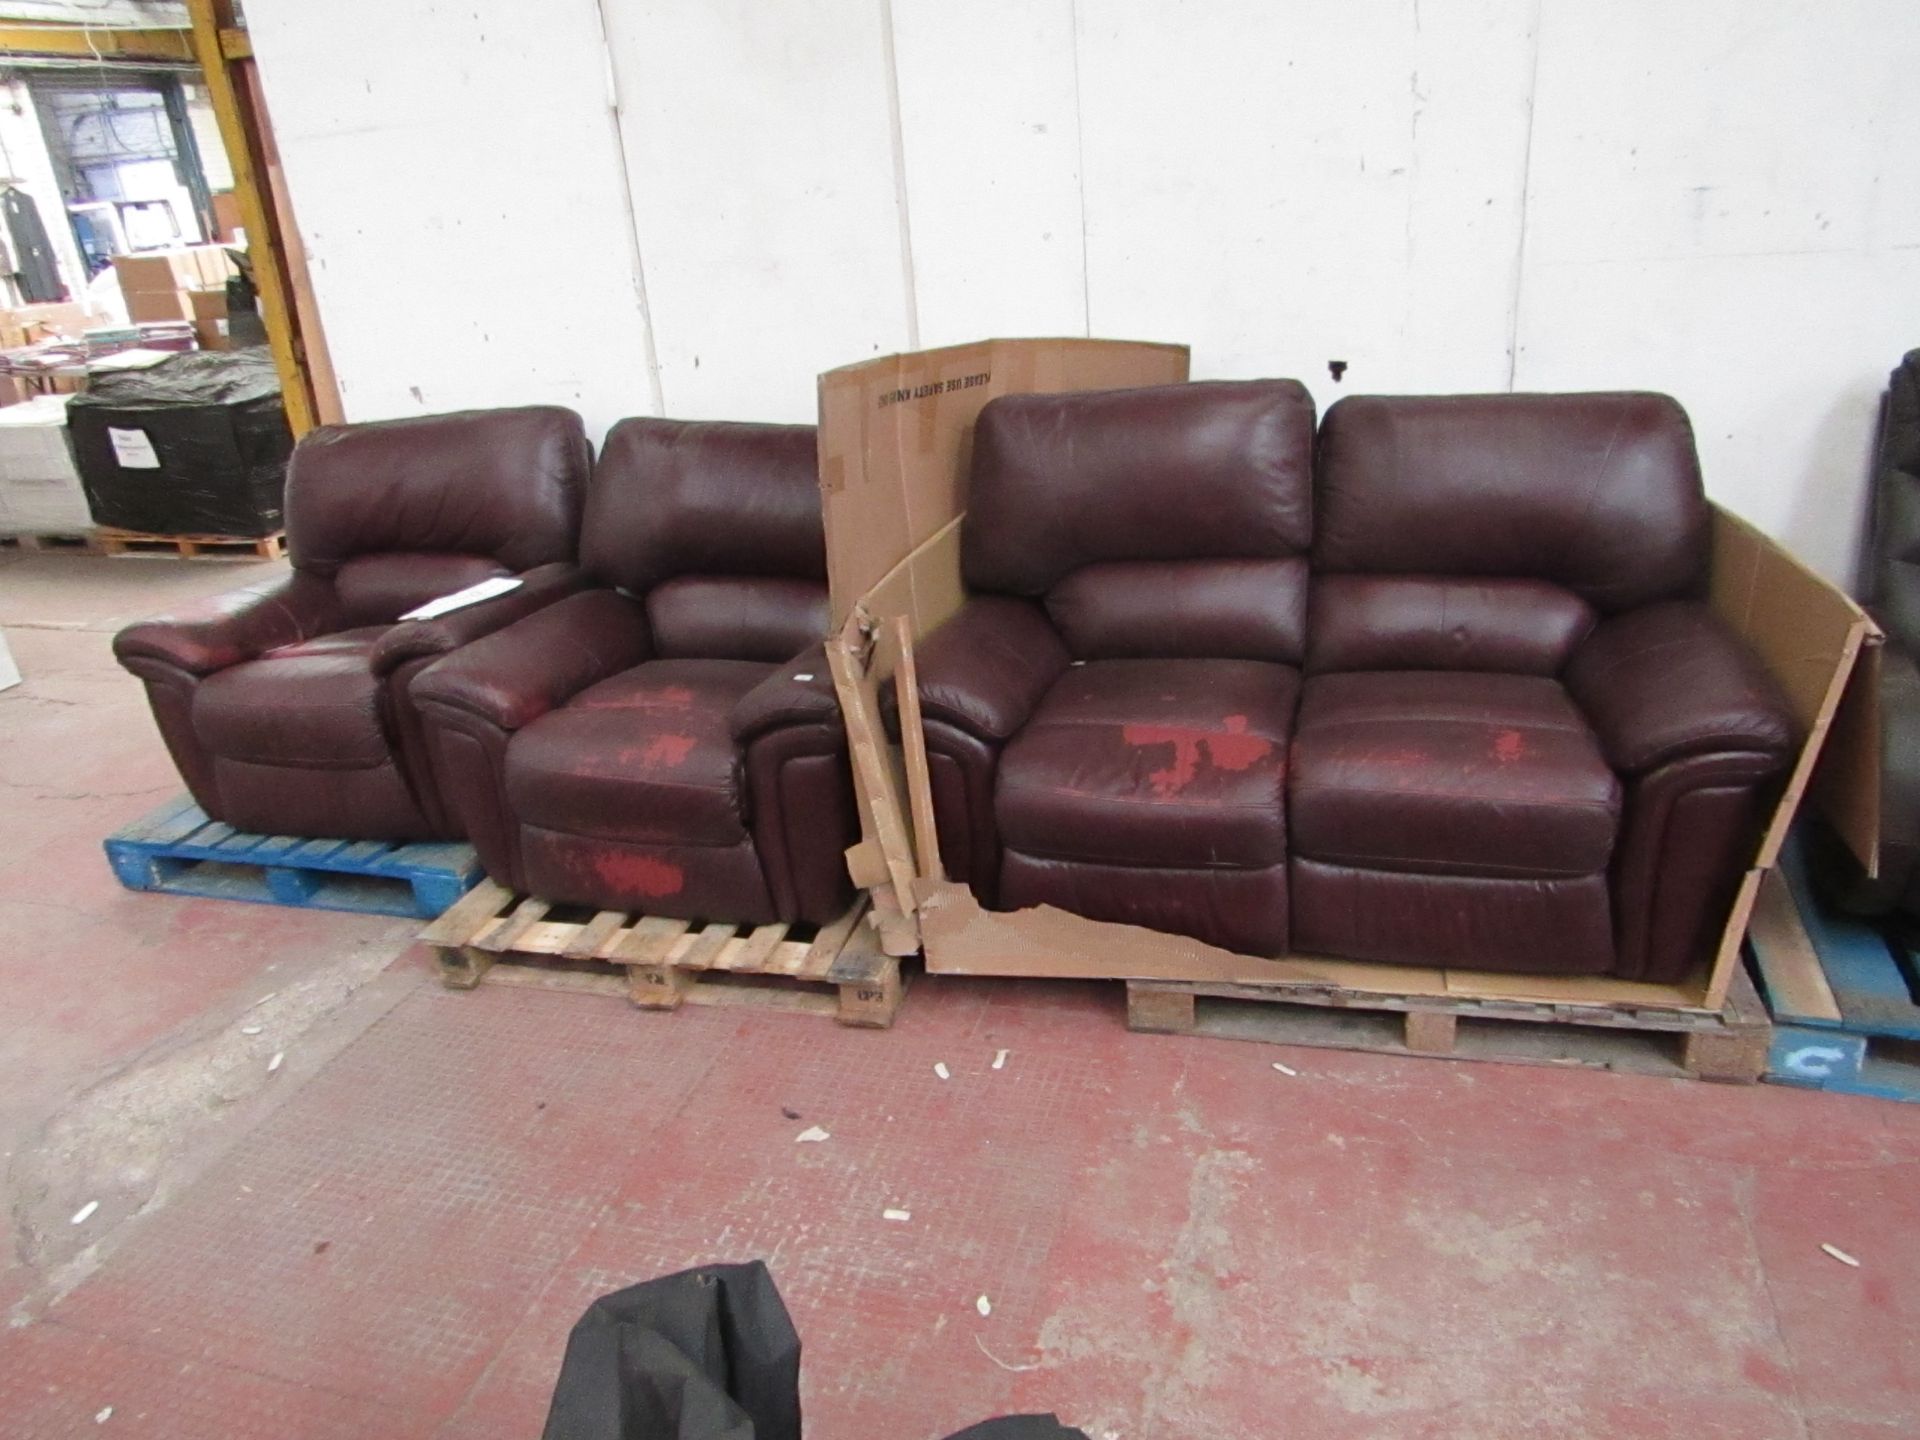 Lazy Boy Oxblood sofa set, includes 2 arm chairs and a 2 seater sofa all have issue with the